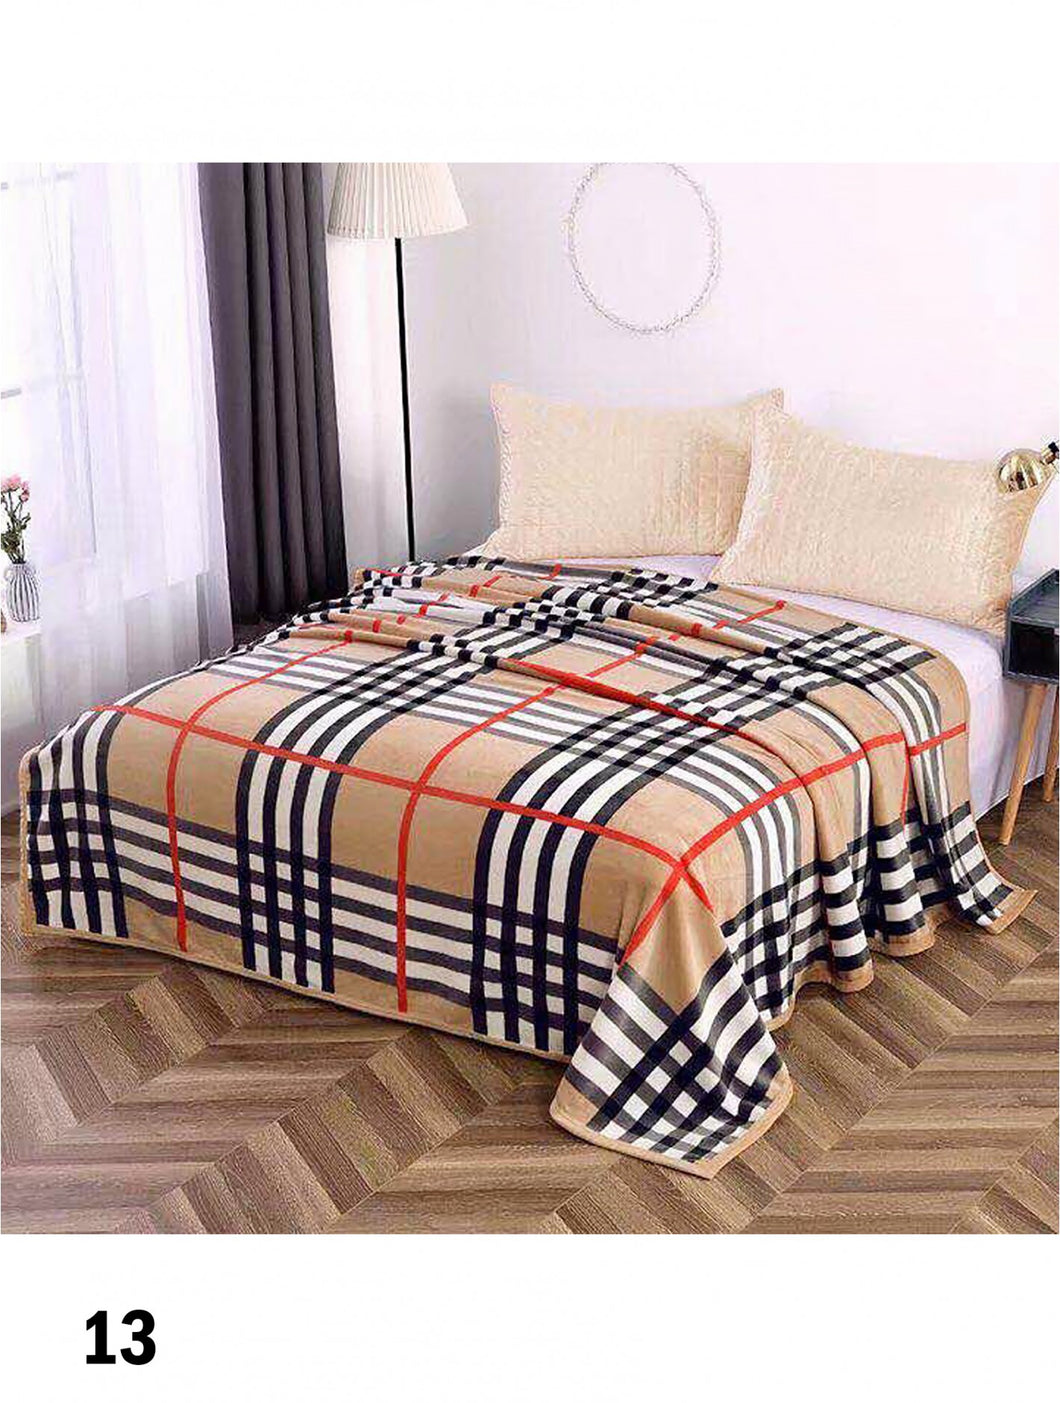 Embroidered Microfiber Soft Printed Flannel Blanket (with gift packaging) - Brown, Black, White and Red